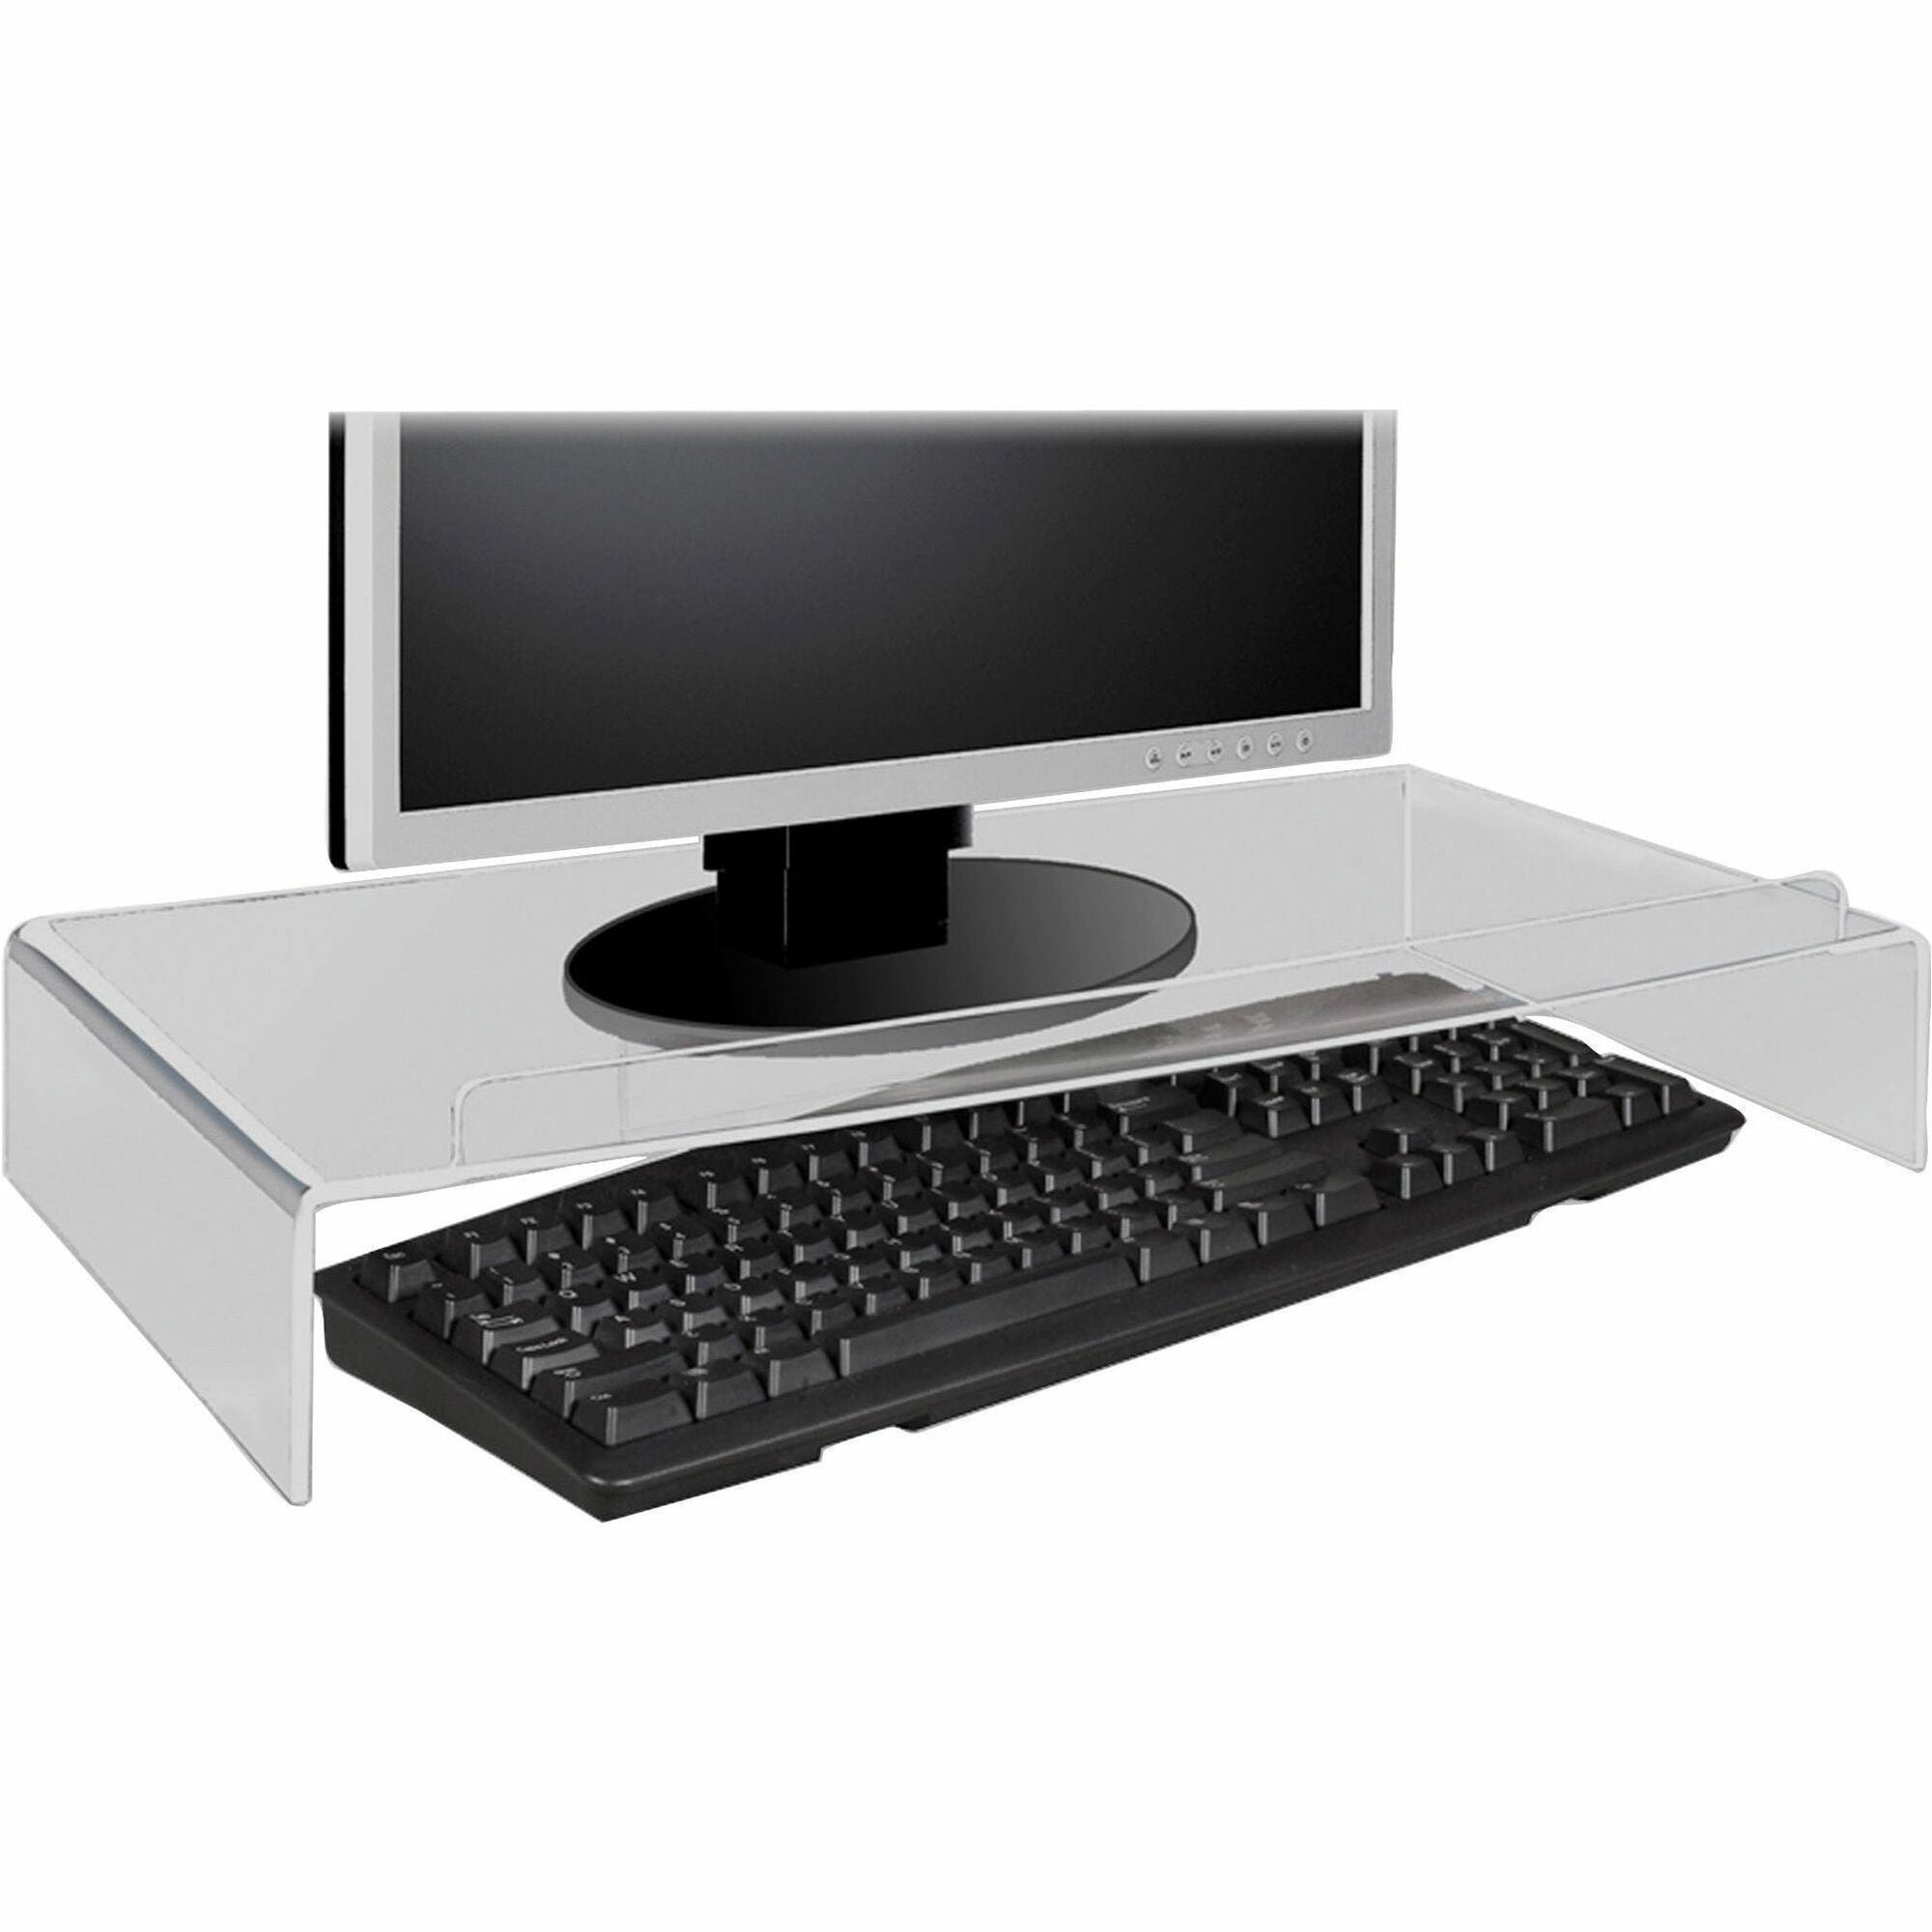 Kantek Acrylic Monitor Stand with Keyboard Storage - Up to 19" Screen Support - 50 lb Load Capacity - CRT Display Type Supported21.3" Width - Desktop - Acrylic - Clear - 